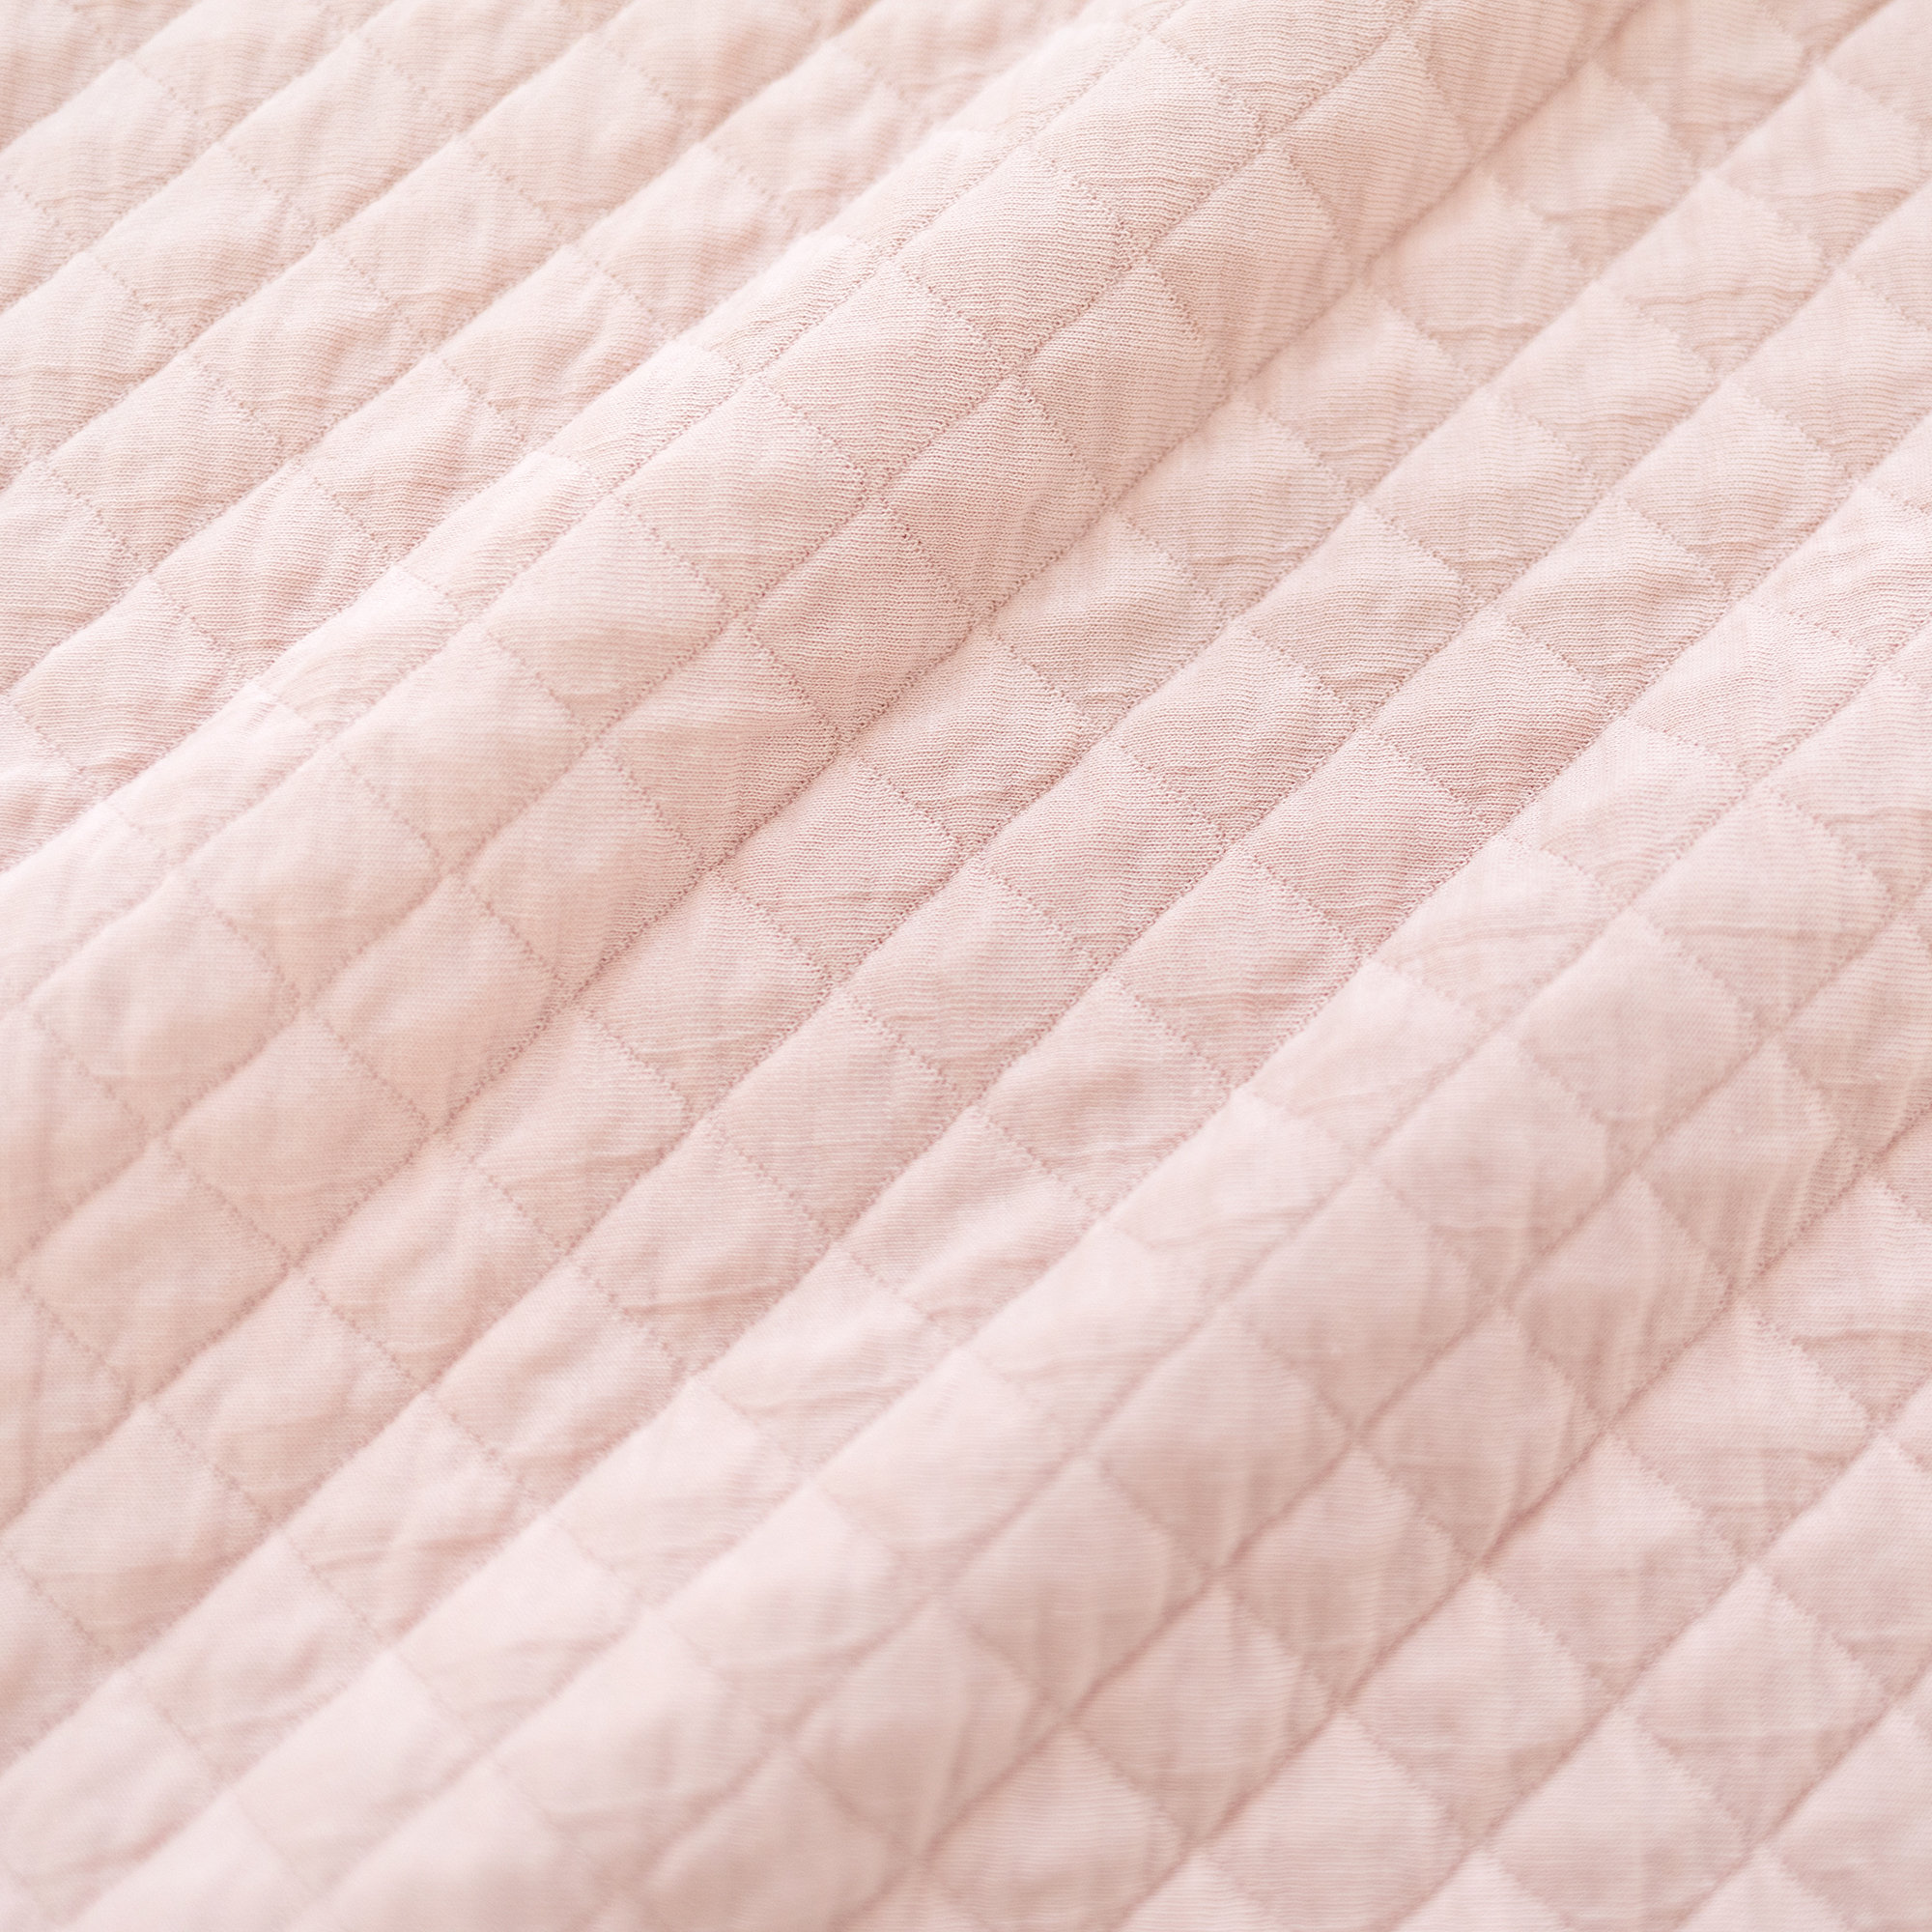 Babero waterproof Pady quilted jersey 37cm QUILT Blush[CARE]